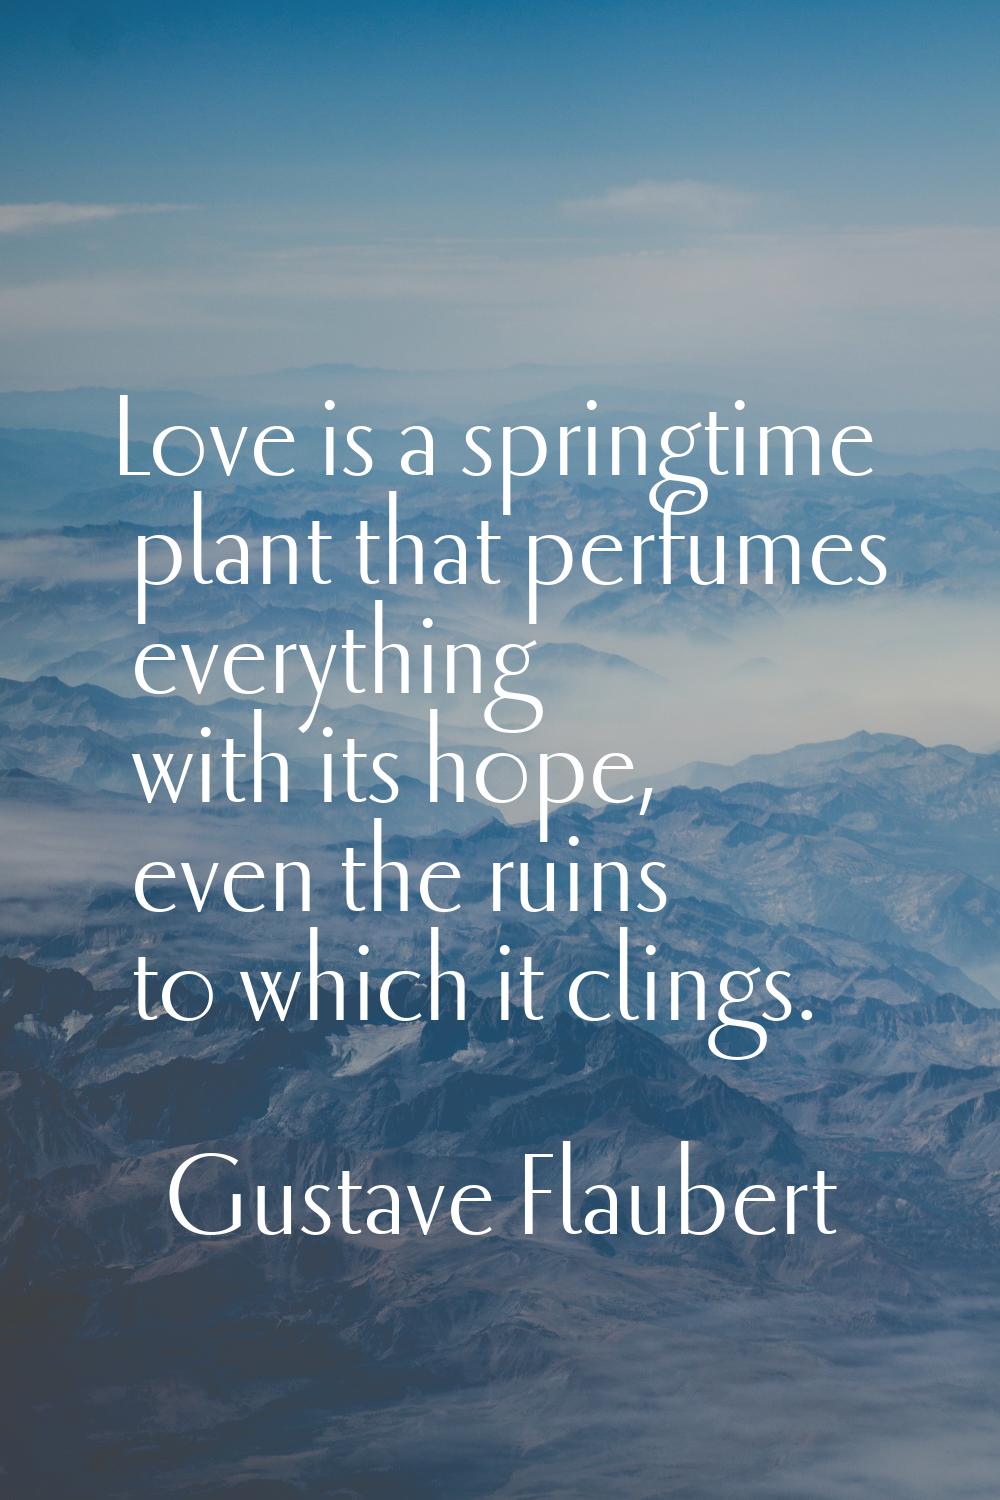 Love is a springtime plant that perfumes everything with its hope, even the ruins to which it cling